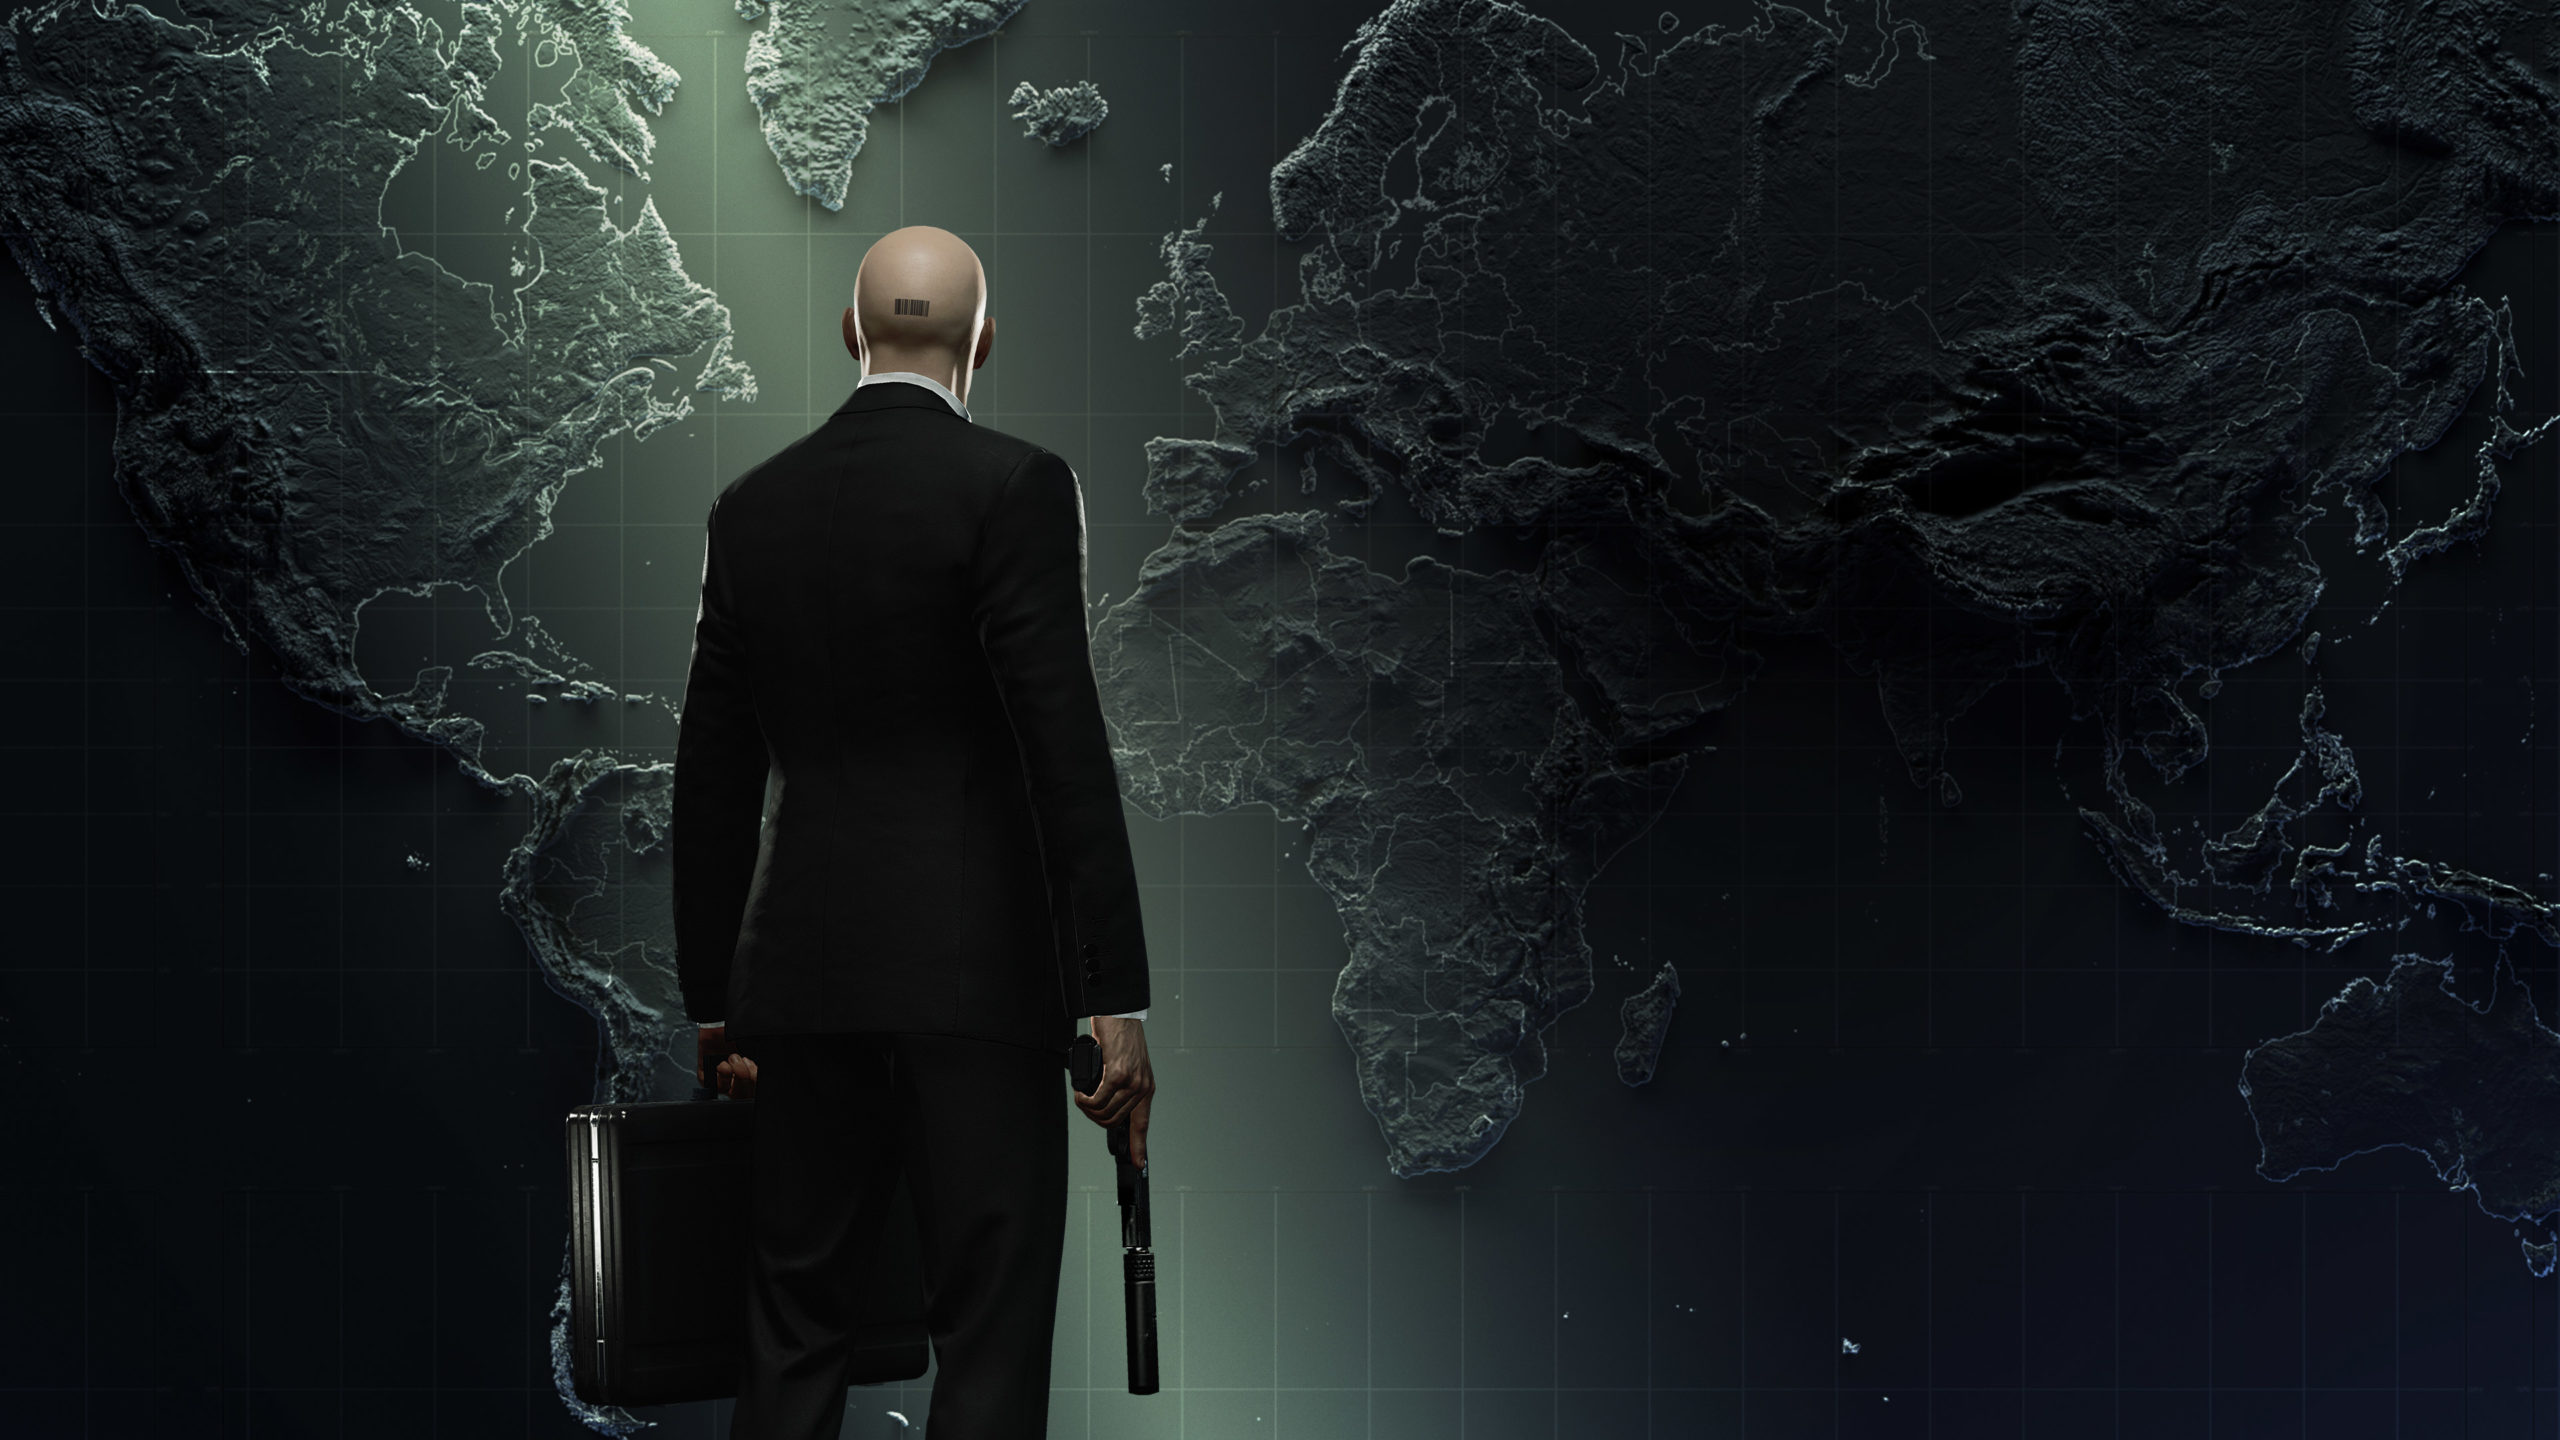  Hitman 3 year 2 reveal coming later this week 